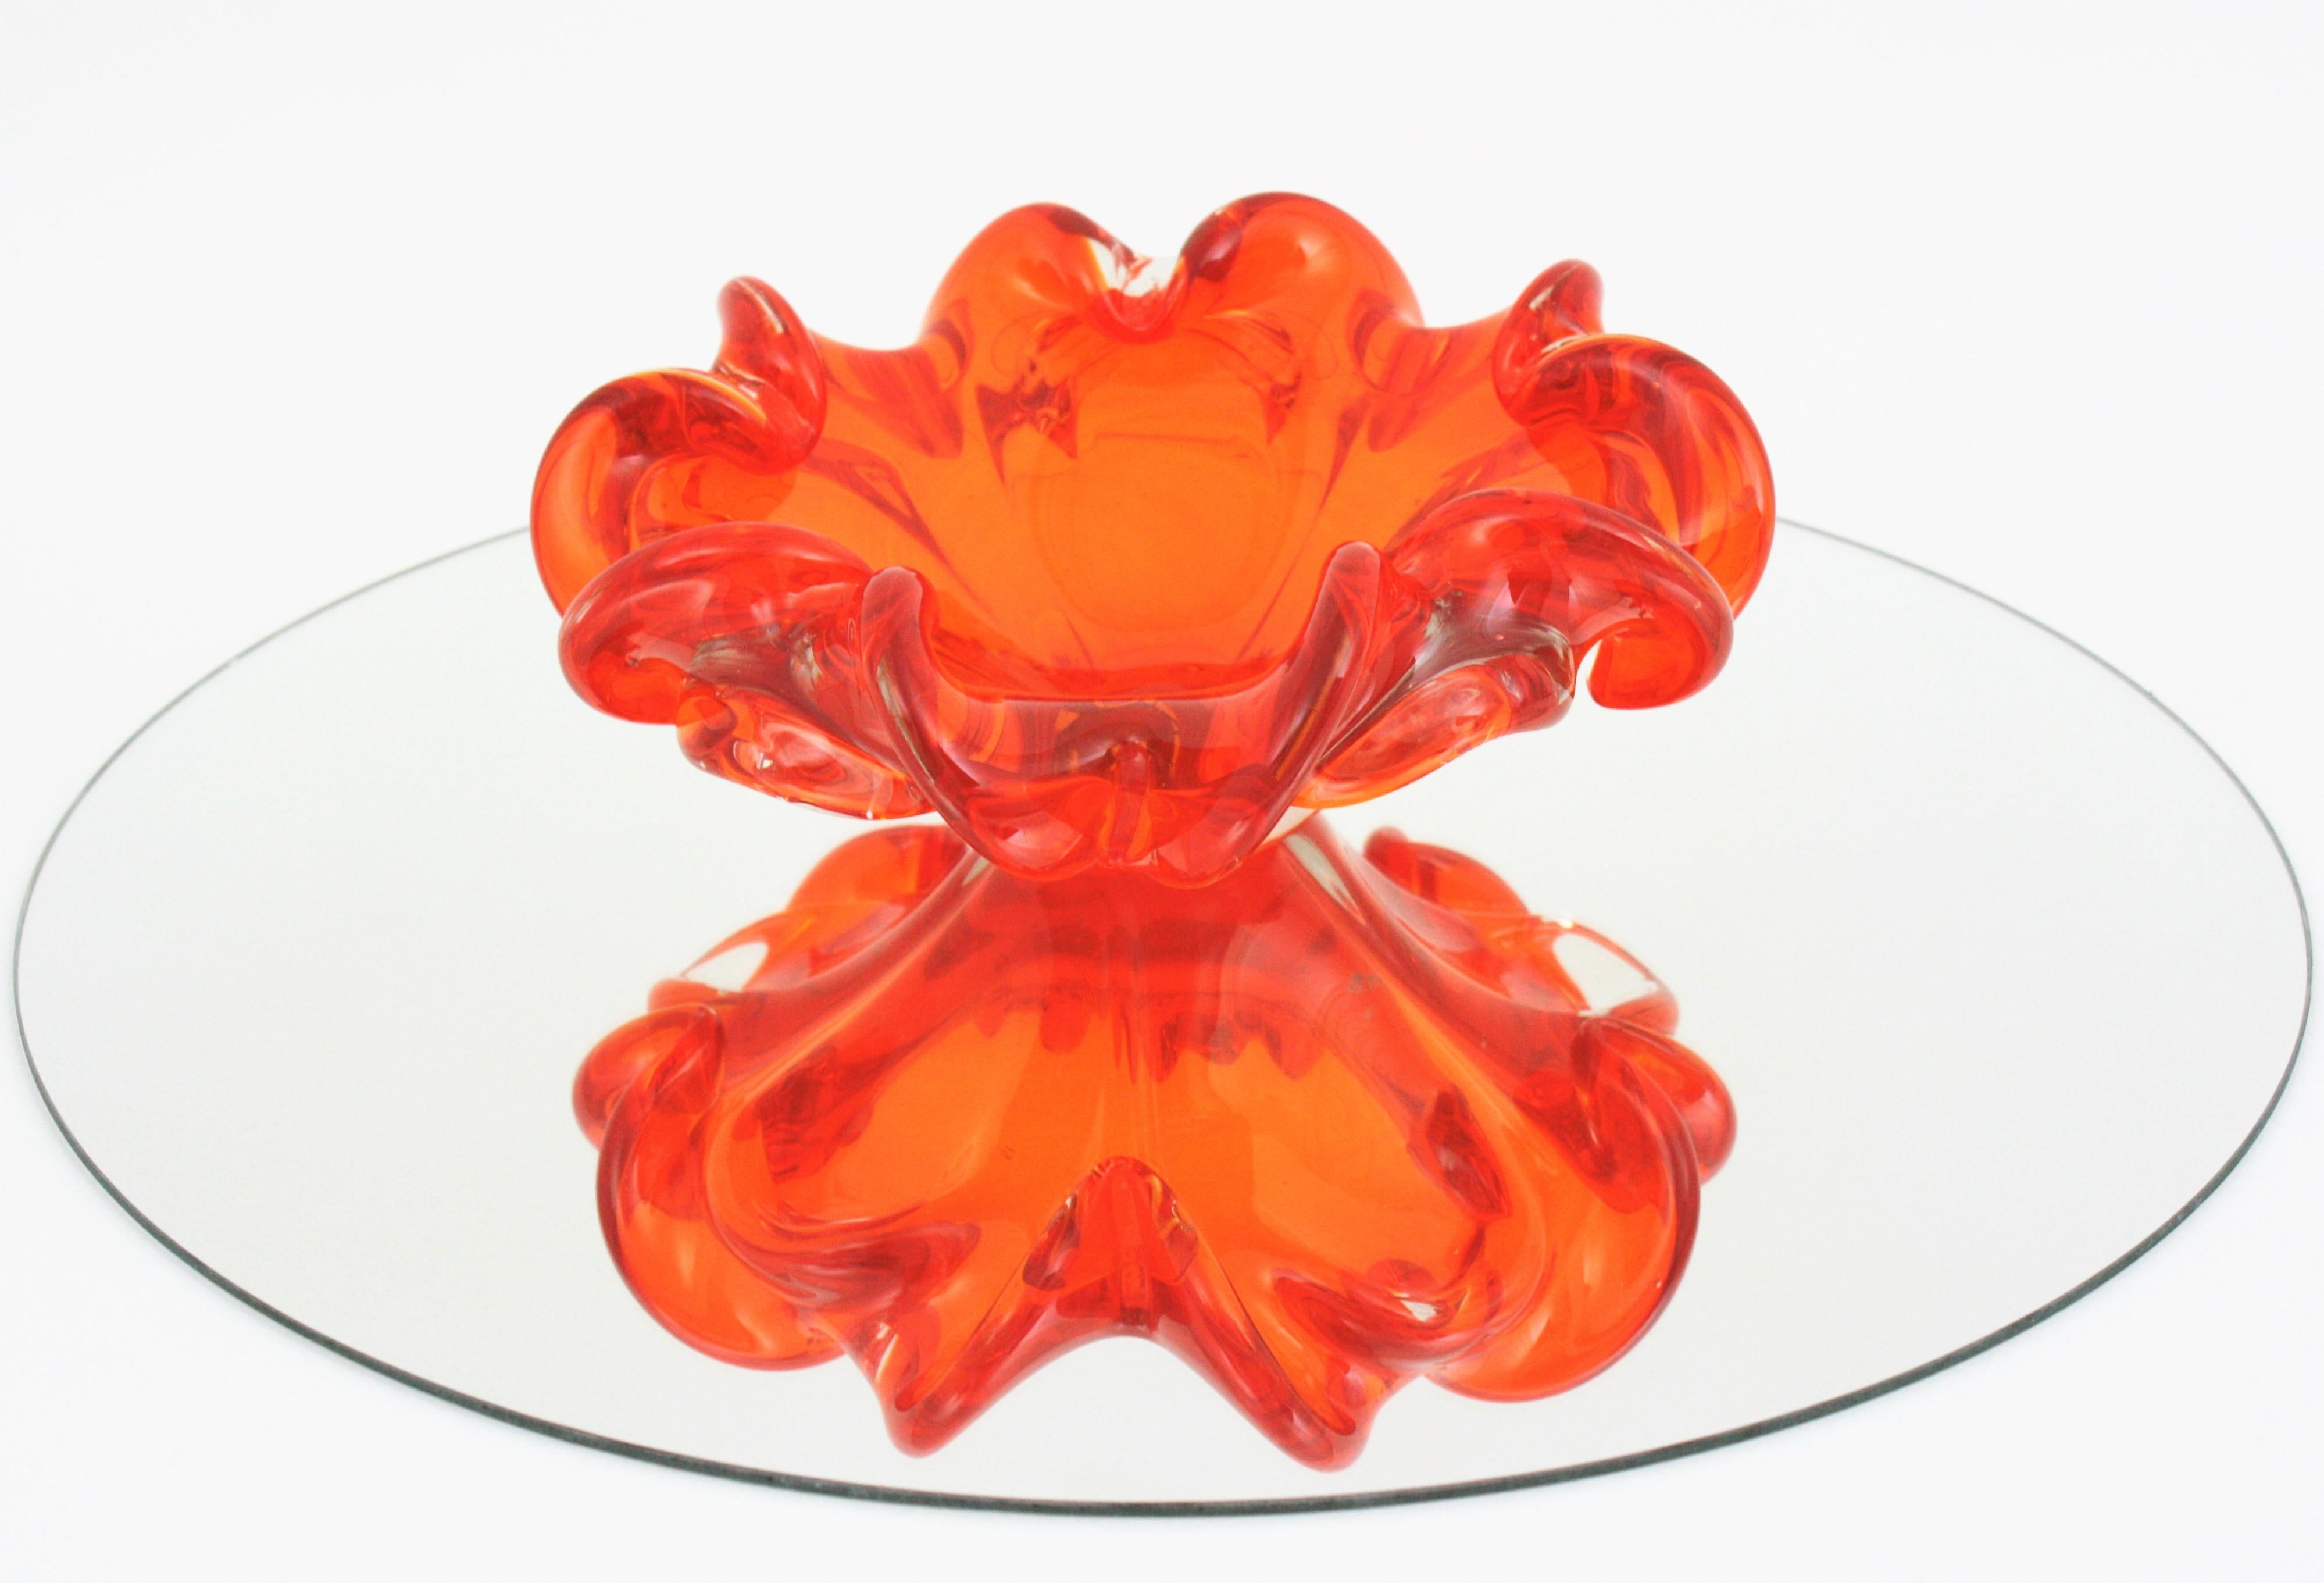 Midcentury Italian Murano Sommerso Orange and Clear Art Glass Bowl / Ashtray For Sale 8